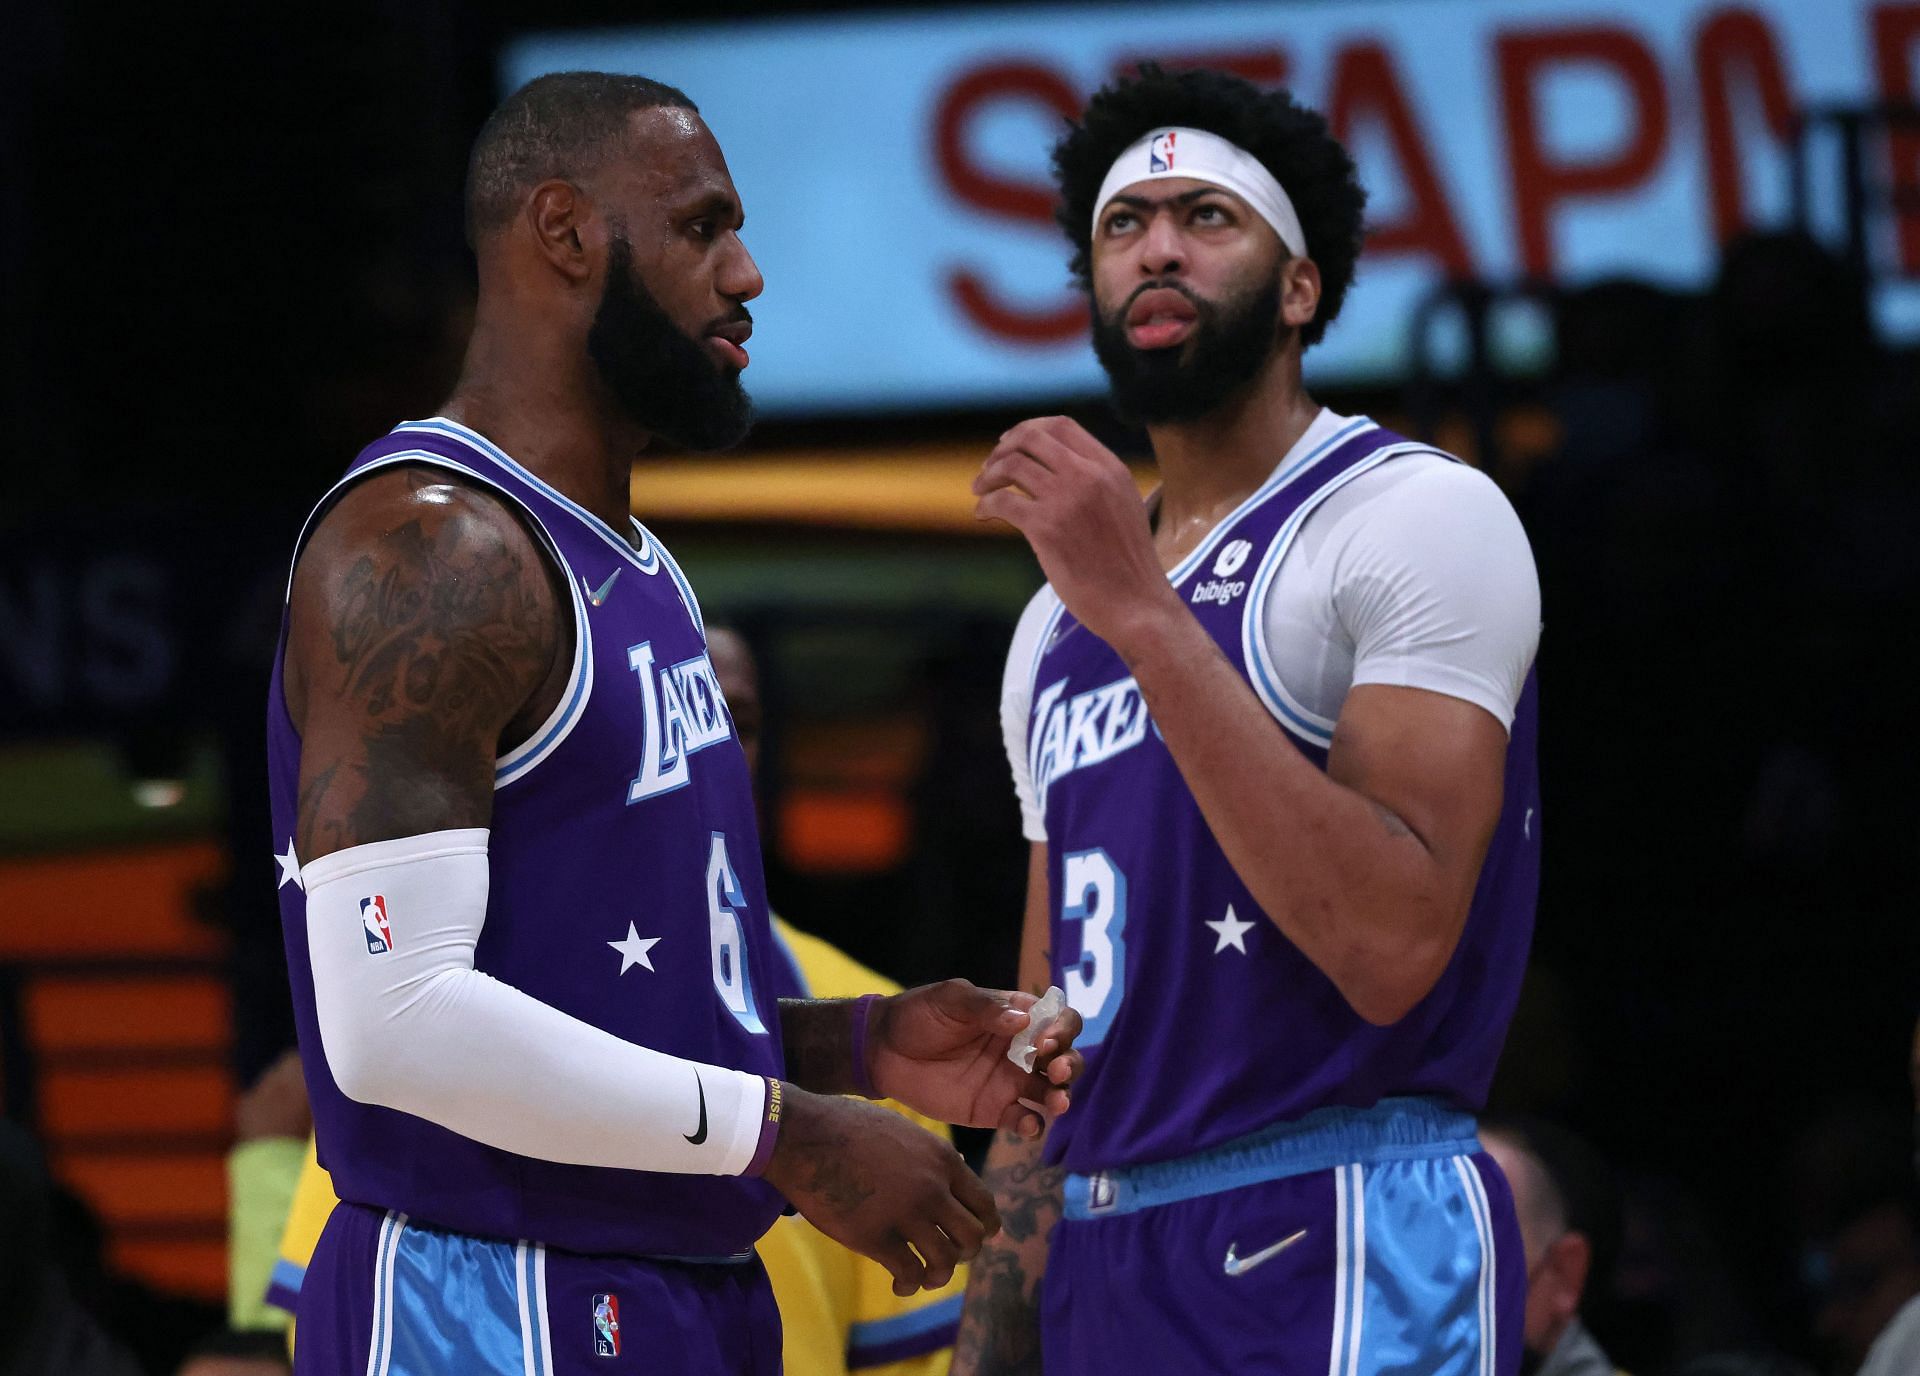 LeBron James and Anthony Davis of the LA Lakers.